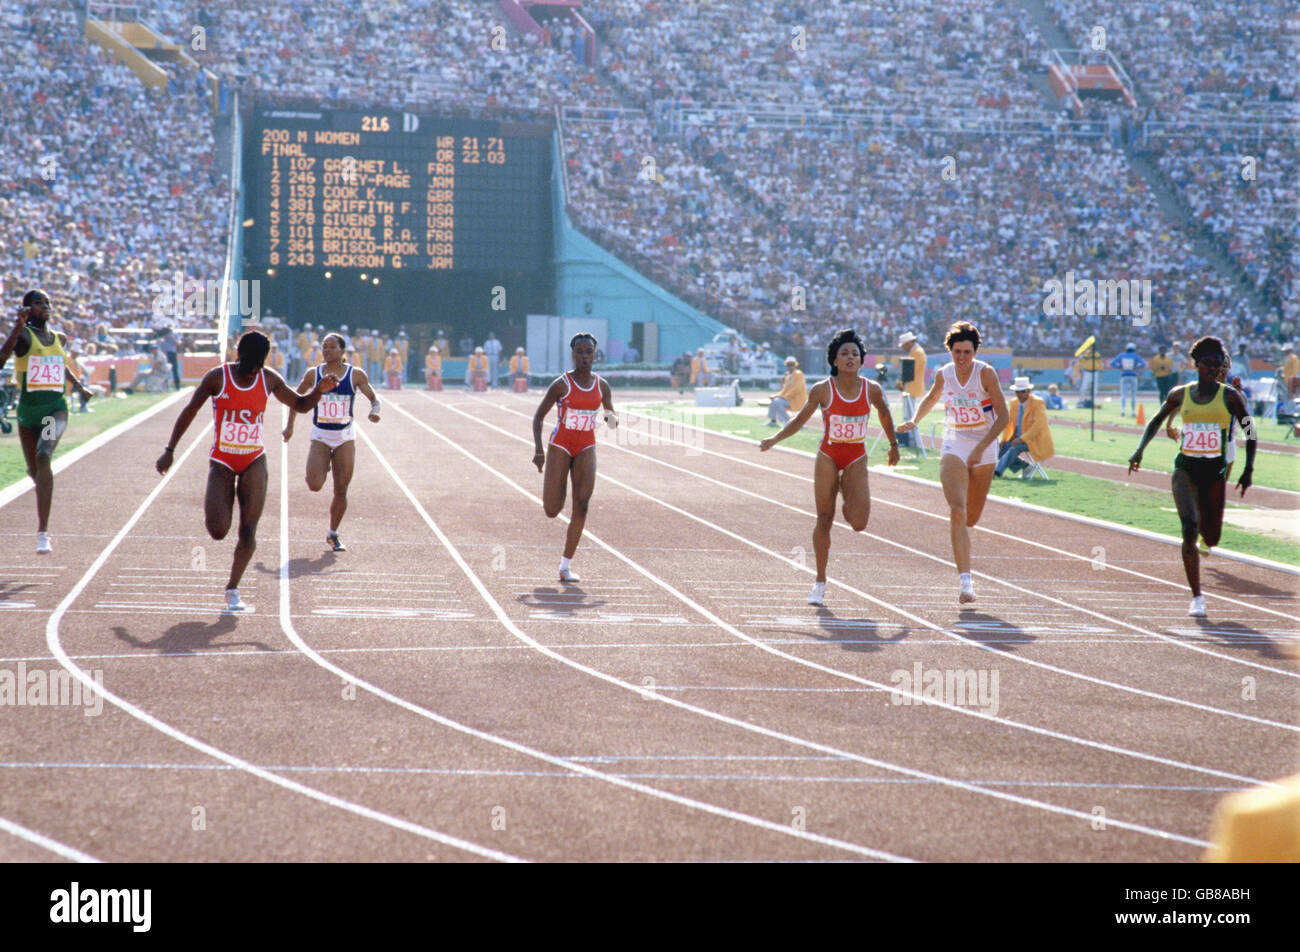 USA's Valerie Brisco-Hooks (second l) wins gold from teammate Florence Griffith (third r, silver), Jamaica's Merlene Ottey (r, bronze), Great Britain's Kathy Cook (second r), Jamaica's Grace Jackson (l), USA's Randy Givens (fourth l), France's Rose-Aimee Bacoul (third l) and France's Liliane Gaschet (r, hidden) Stock Photo